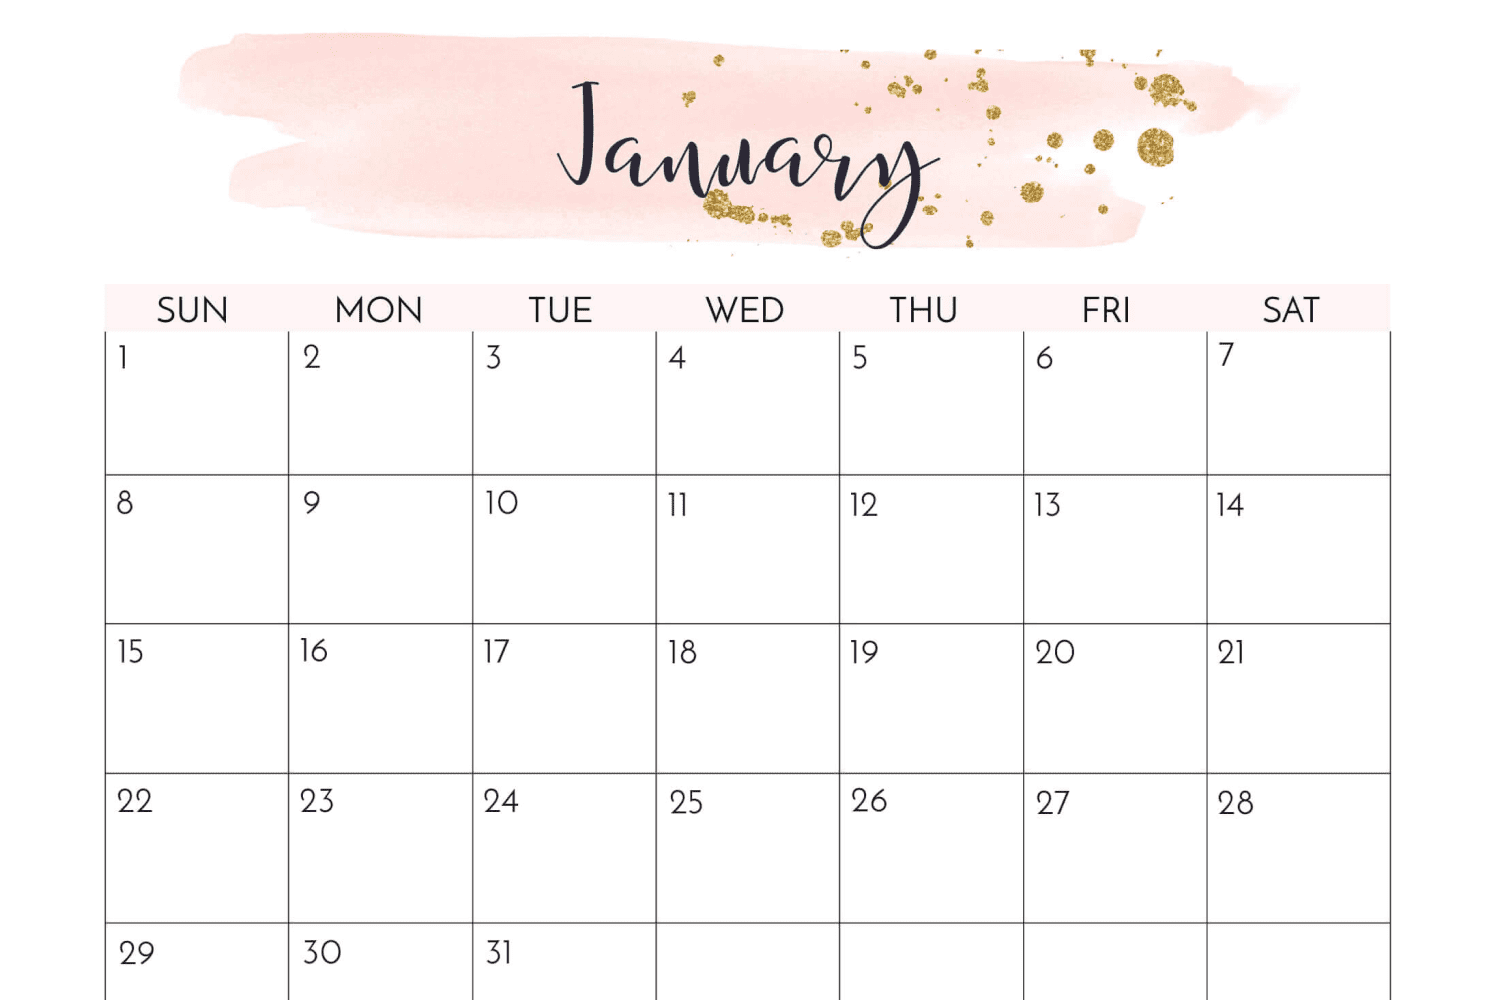 Calendar for January with a white background and a watercolor background in beige-pink.